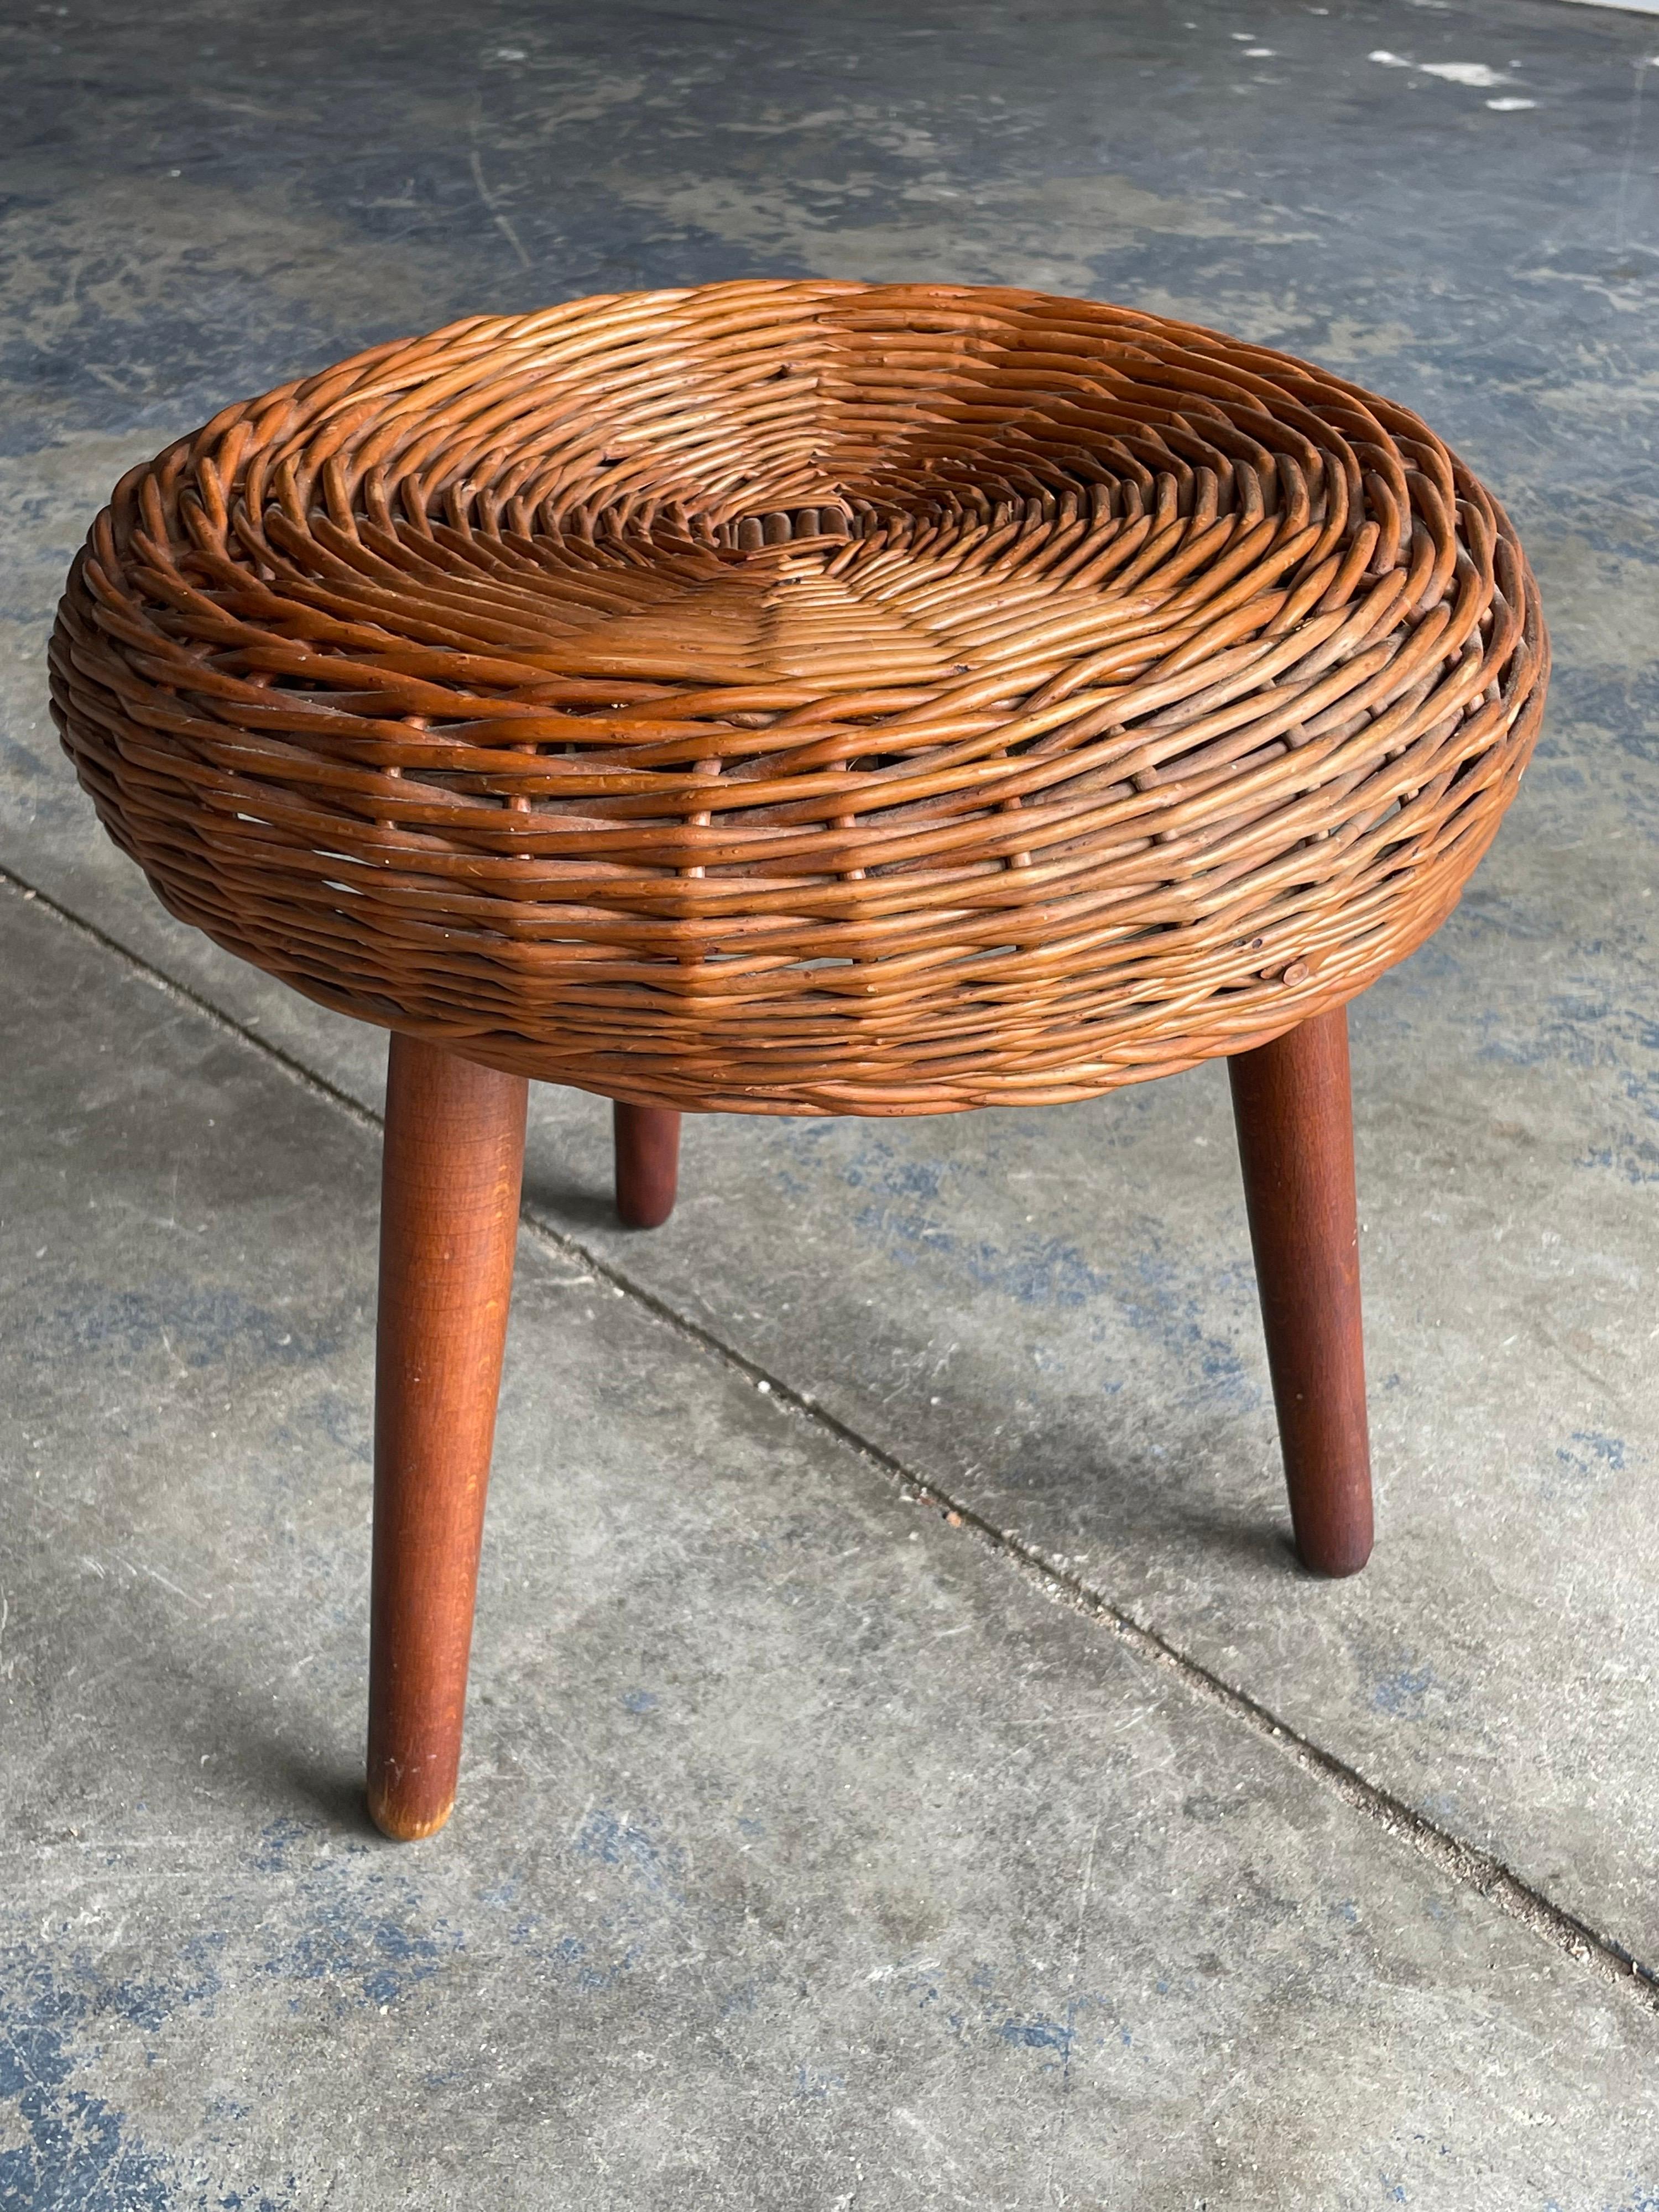 Tony Paul Attributed Tripod Stool or table, Rattan and Wood In Good Condition For Sale In St.Petersburg, FL